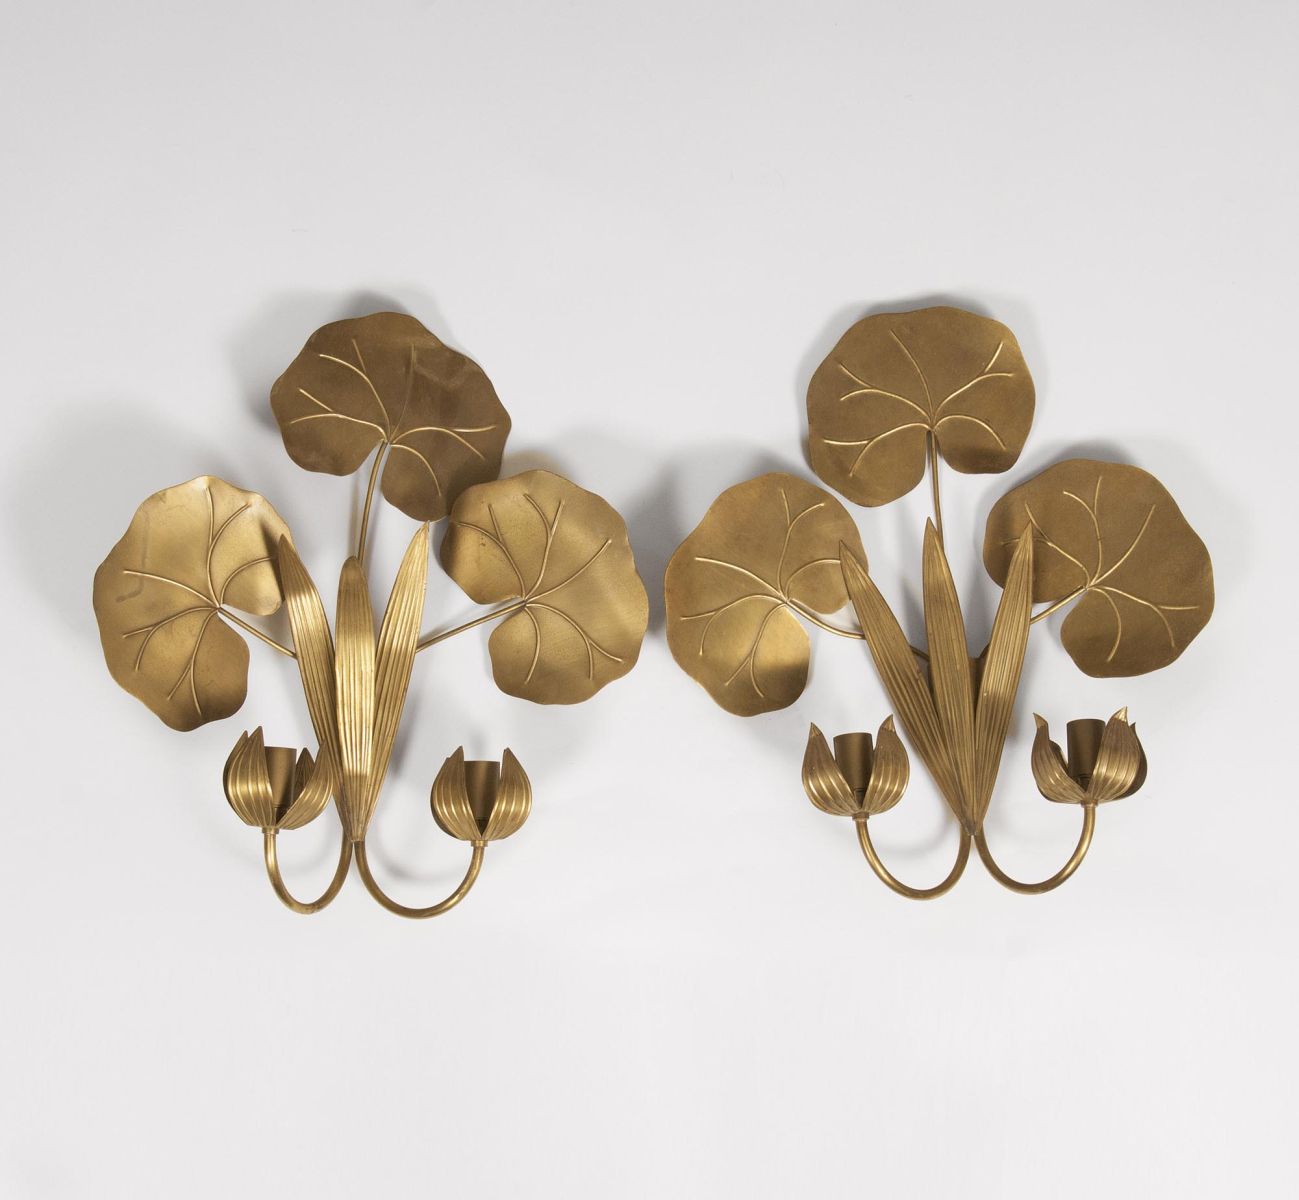 A Pair of Decorative Mid-Century Lotus Wall Appliques